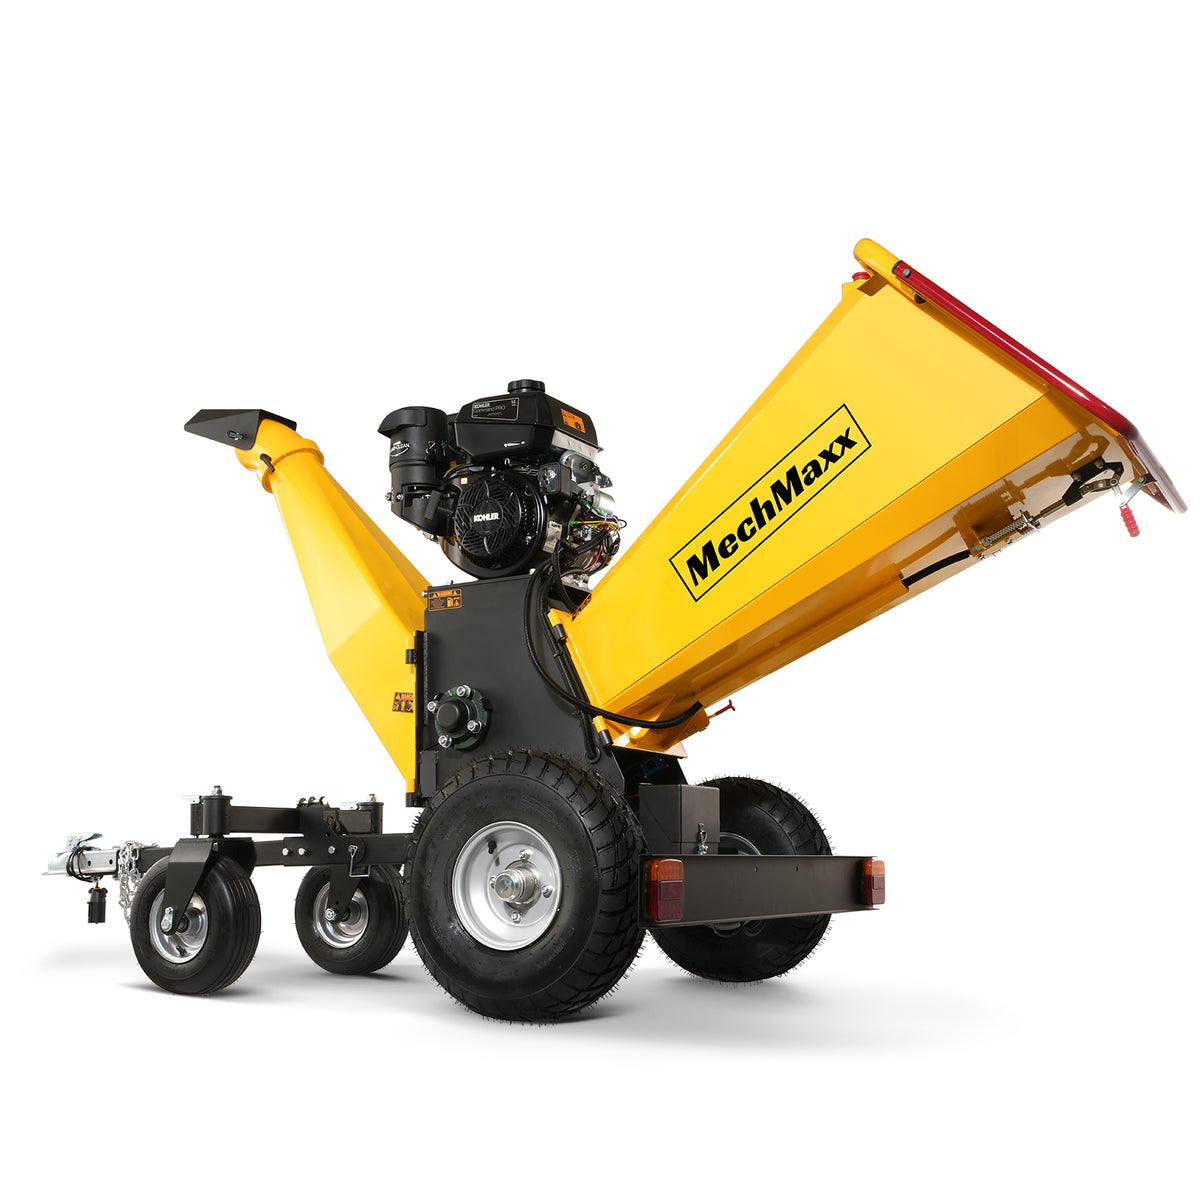 6 inch E-start KOHLER 429cc 14hp Gas Powered 4 - Wheel Drum Wood chipper with Taillight